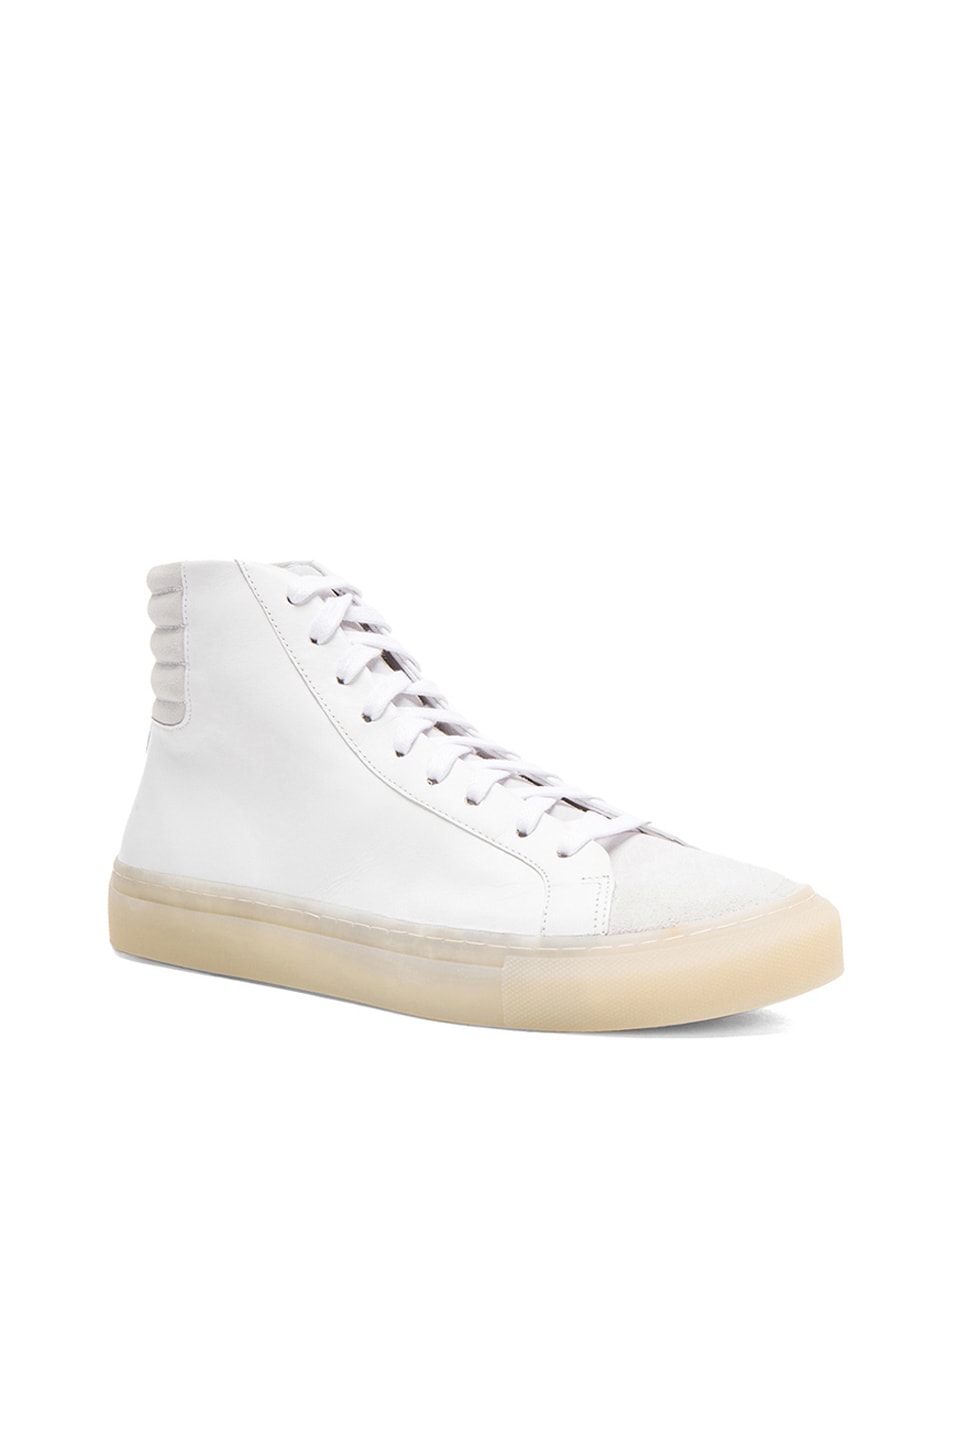 Image 1 of SILENT DAMIR DOMA Fulmar High Top Sneakers in Off White